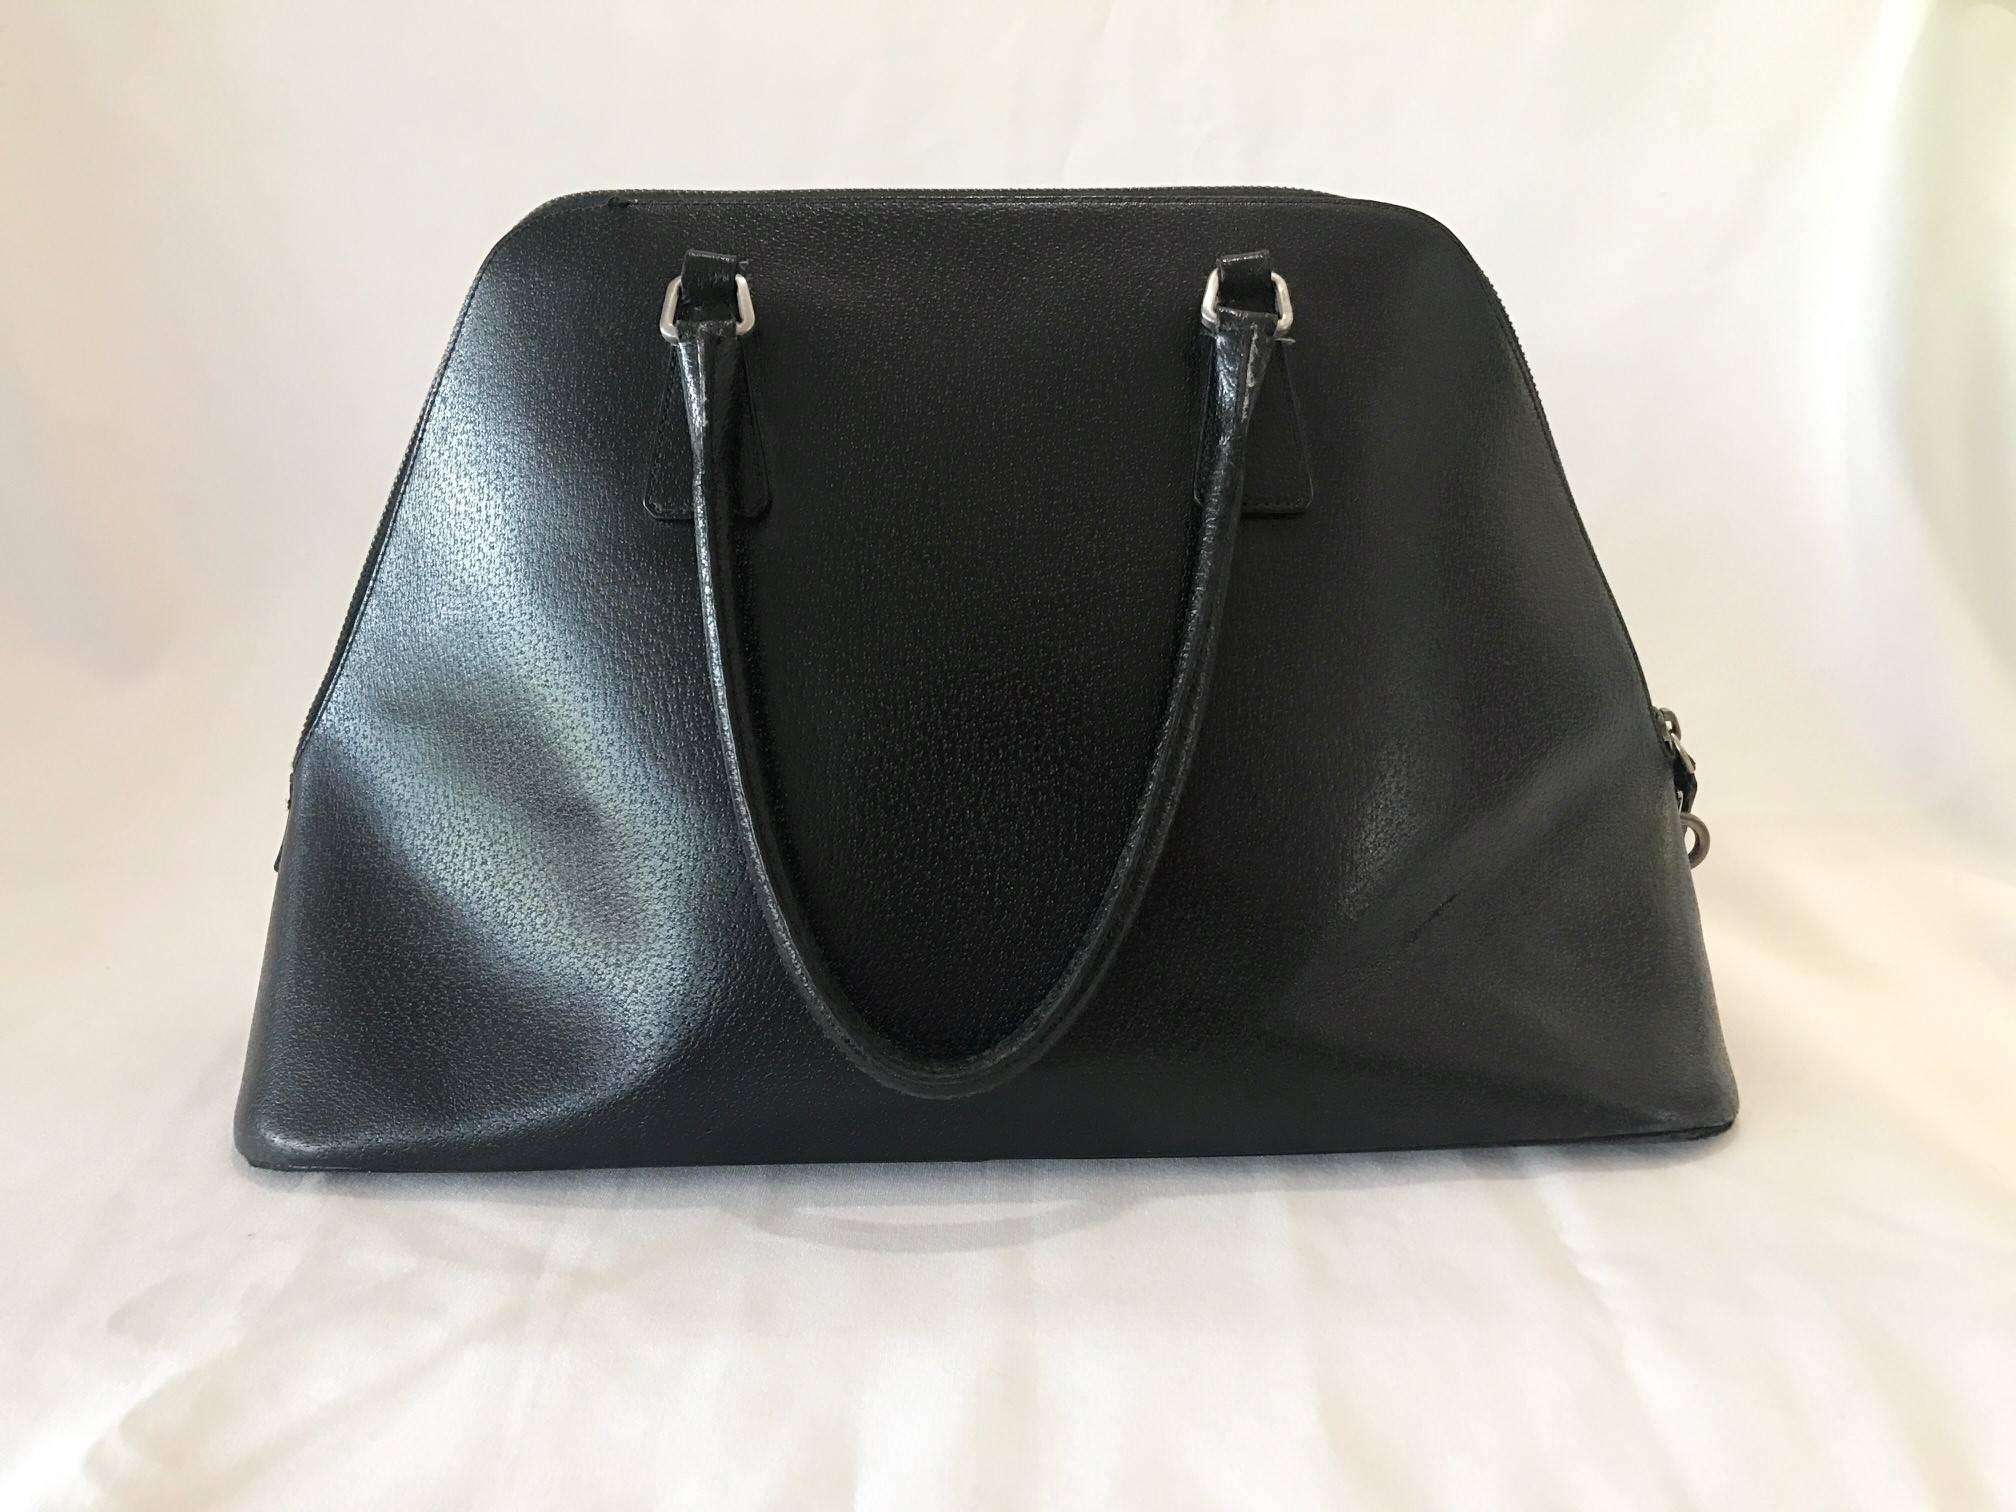 Black Beauty Prada Handbag with Key and Lock, Authentic Prada Leather Bag In Excellent Condition For Sale In Westport, CT